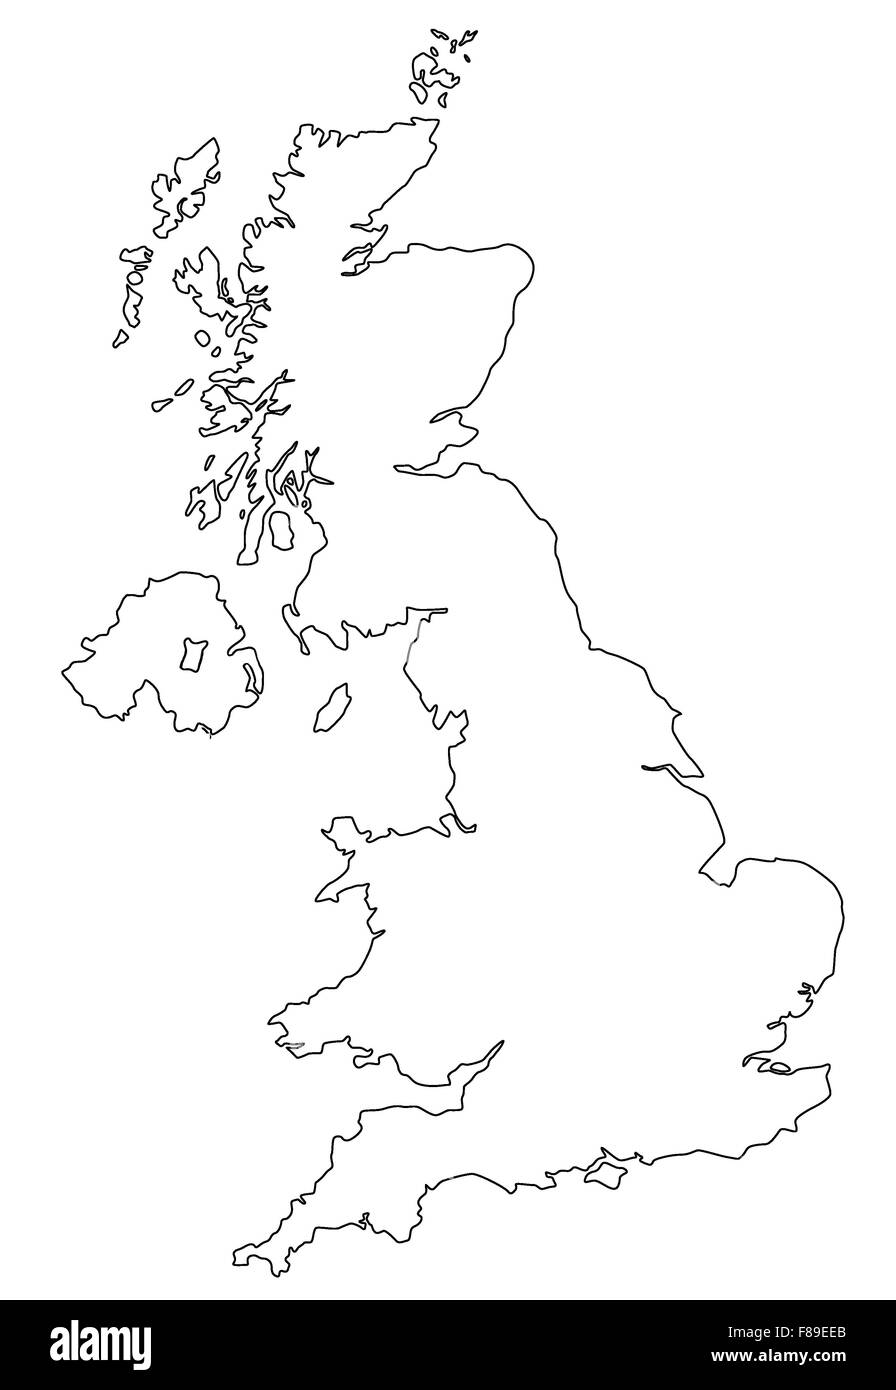 Map of UK filled with white color Stock Photo